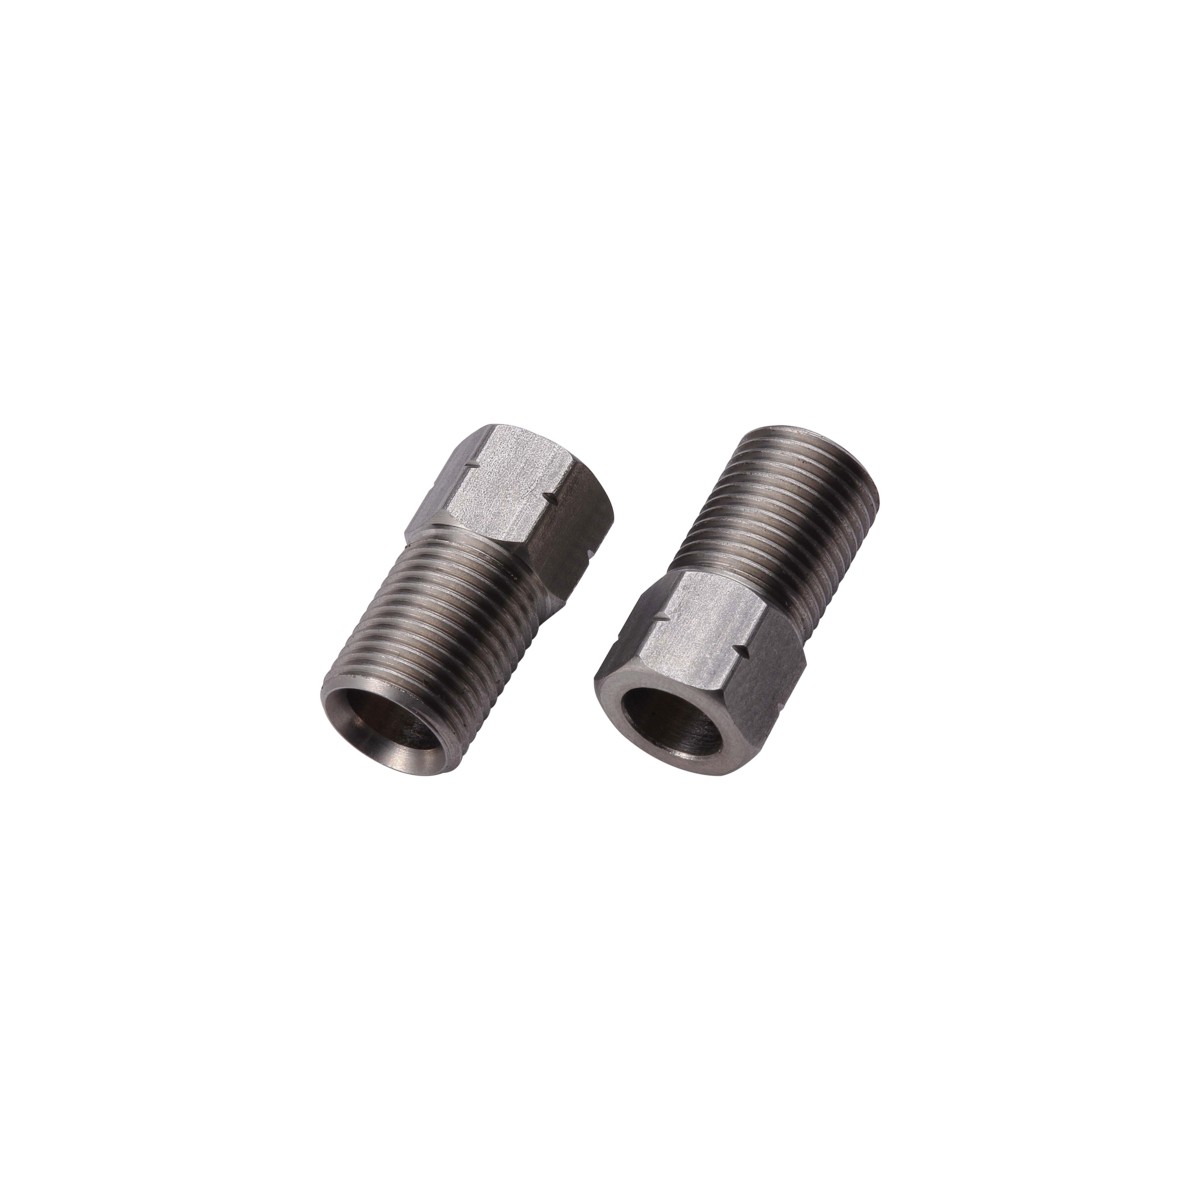 Compression Nut -Shimano - Stainless Steel  (25pcs)